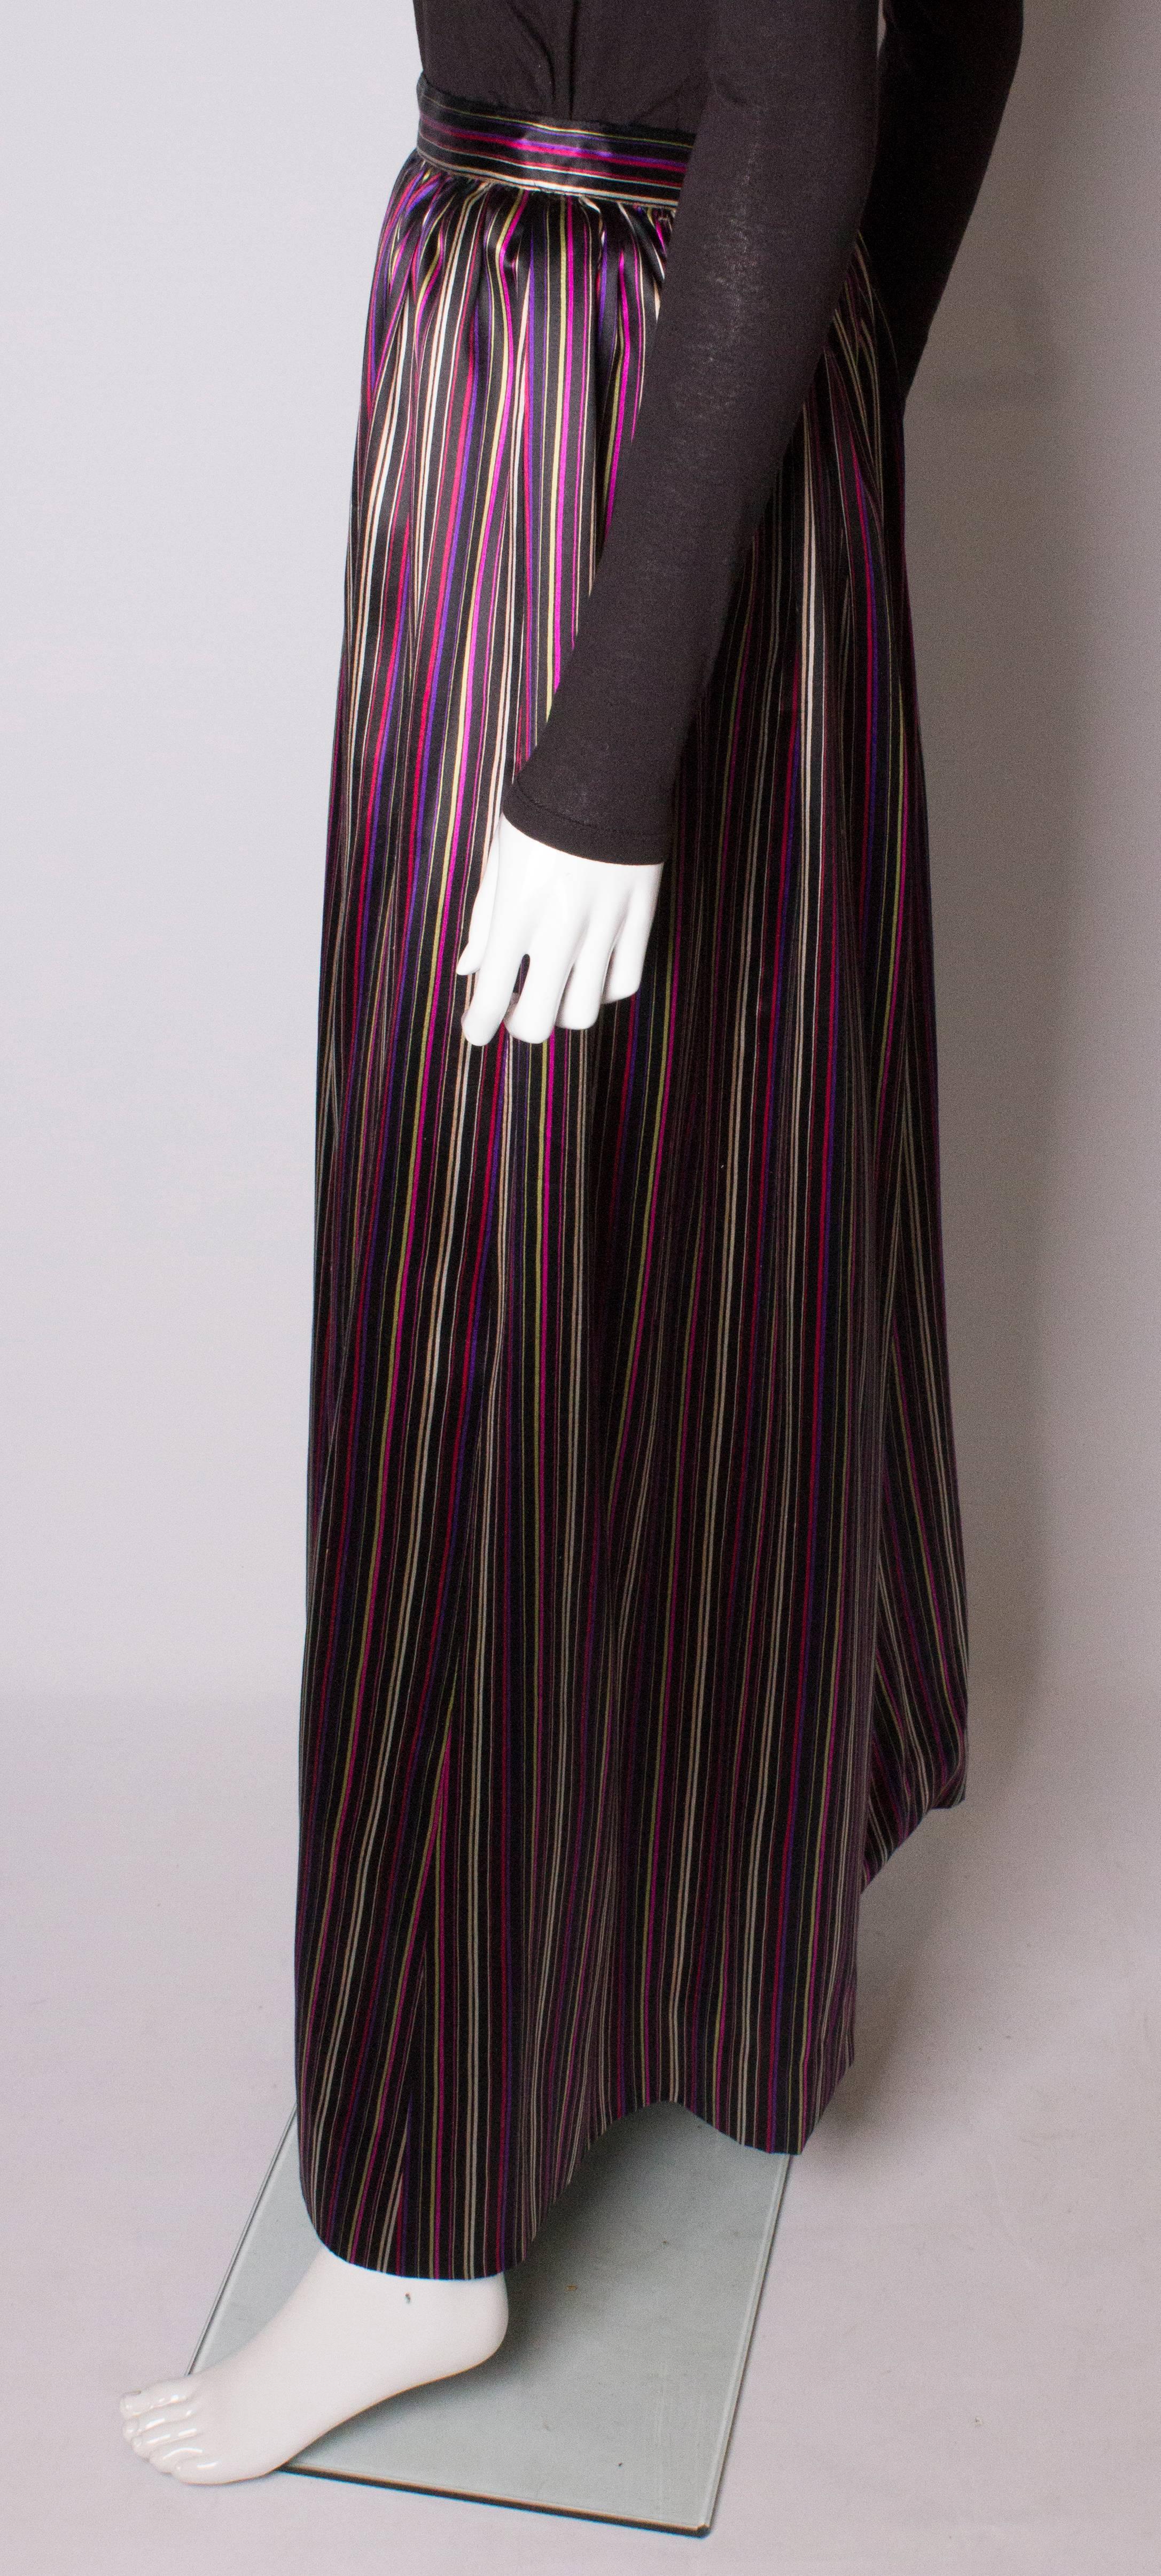 Vintage Givenchy Stripe Skirt In Excellent Condition For Sale In London, GB